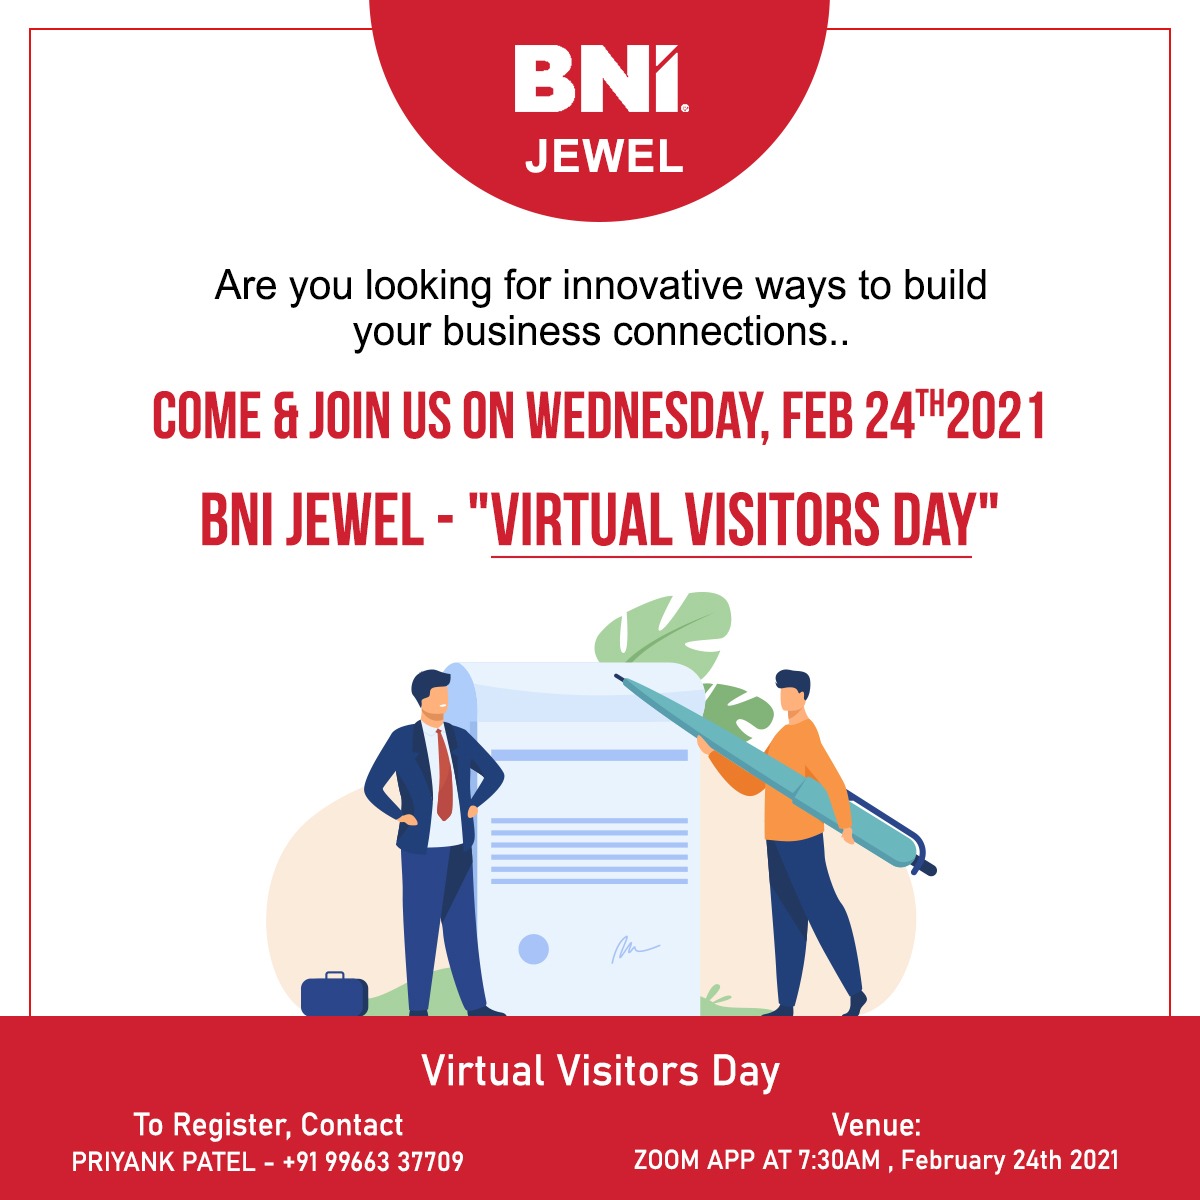 Increase, Multiply and Cherish your Business....
We Invite You, for
Online Visitor's Day..
Come and Join with Us @BNI Jewel on February'24th at 7:30am
#bnijewel #bnionline